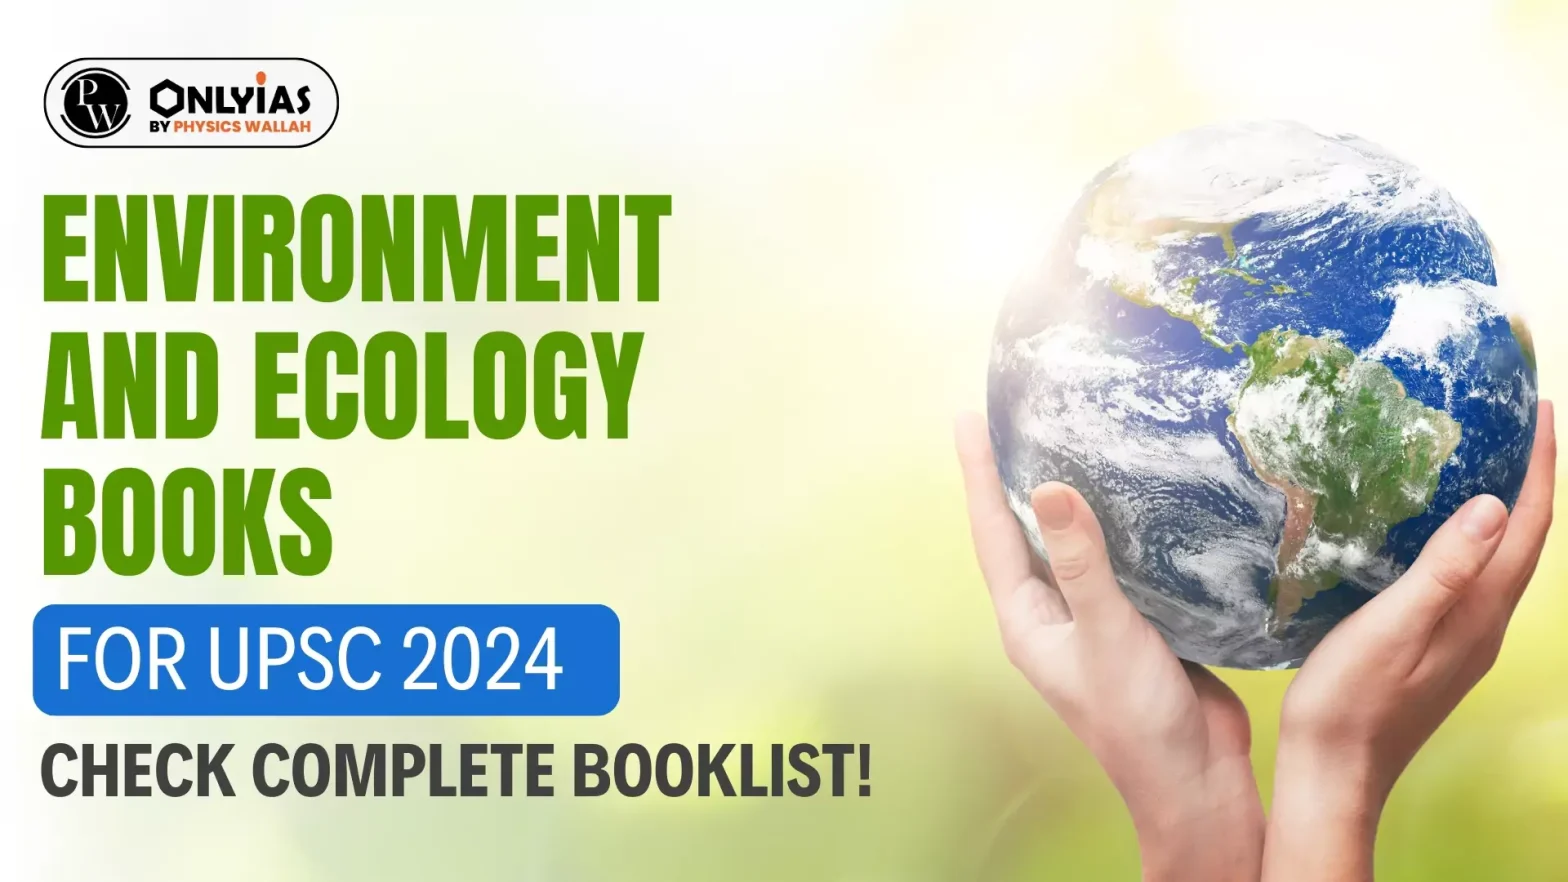 Environment and Ecology Books for UPSC 2024, Check Complete Booklist!